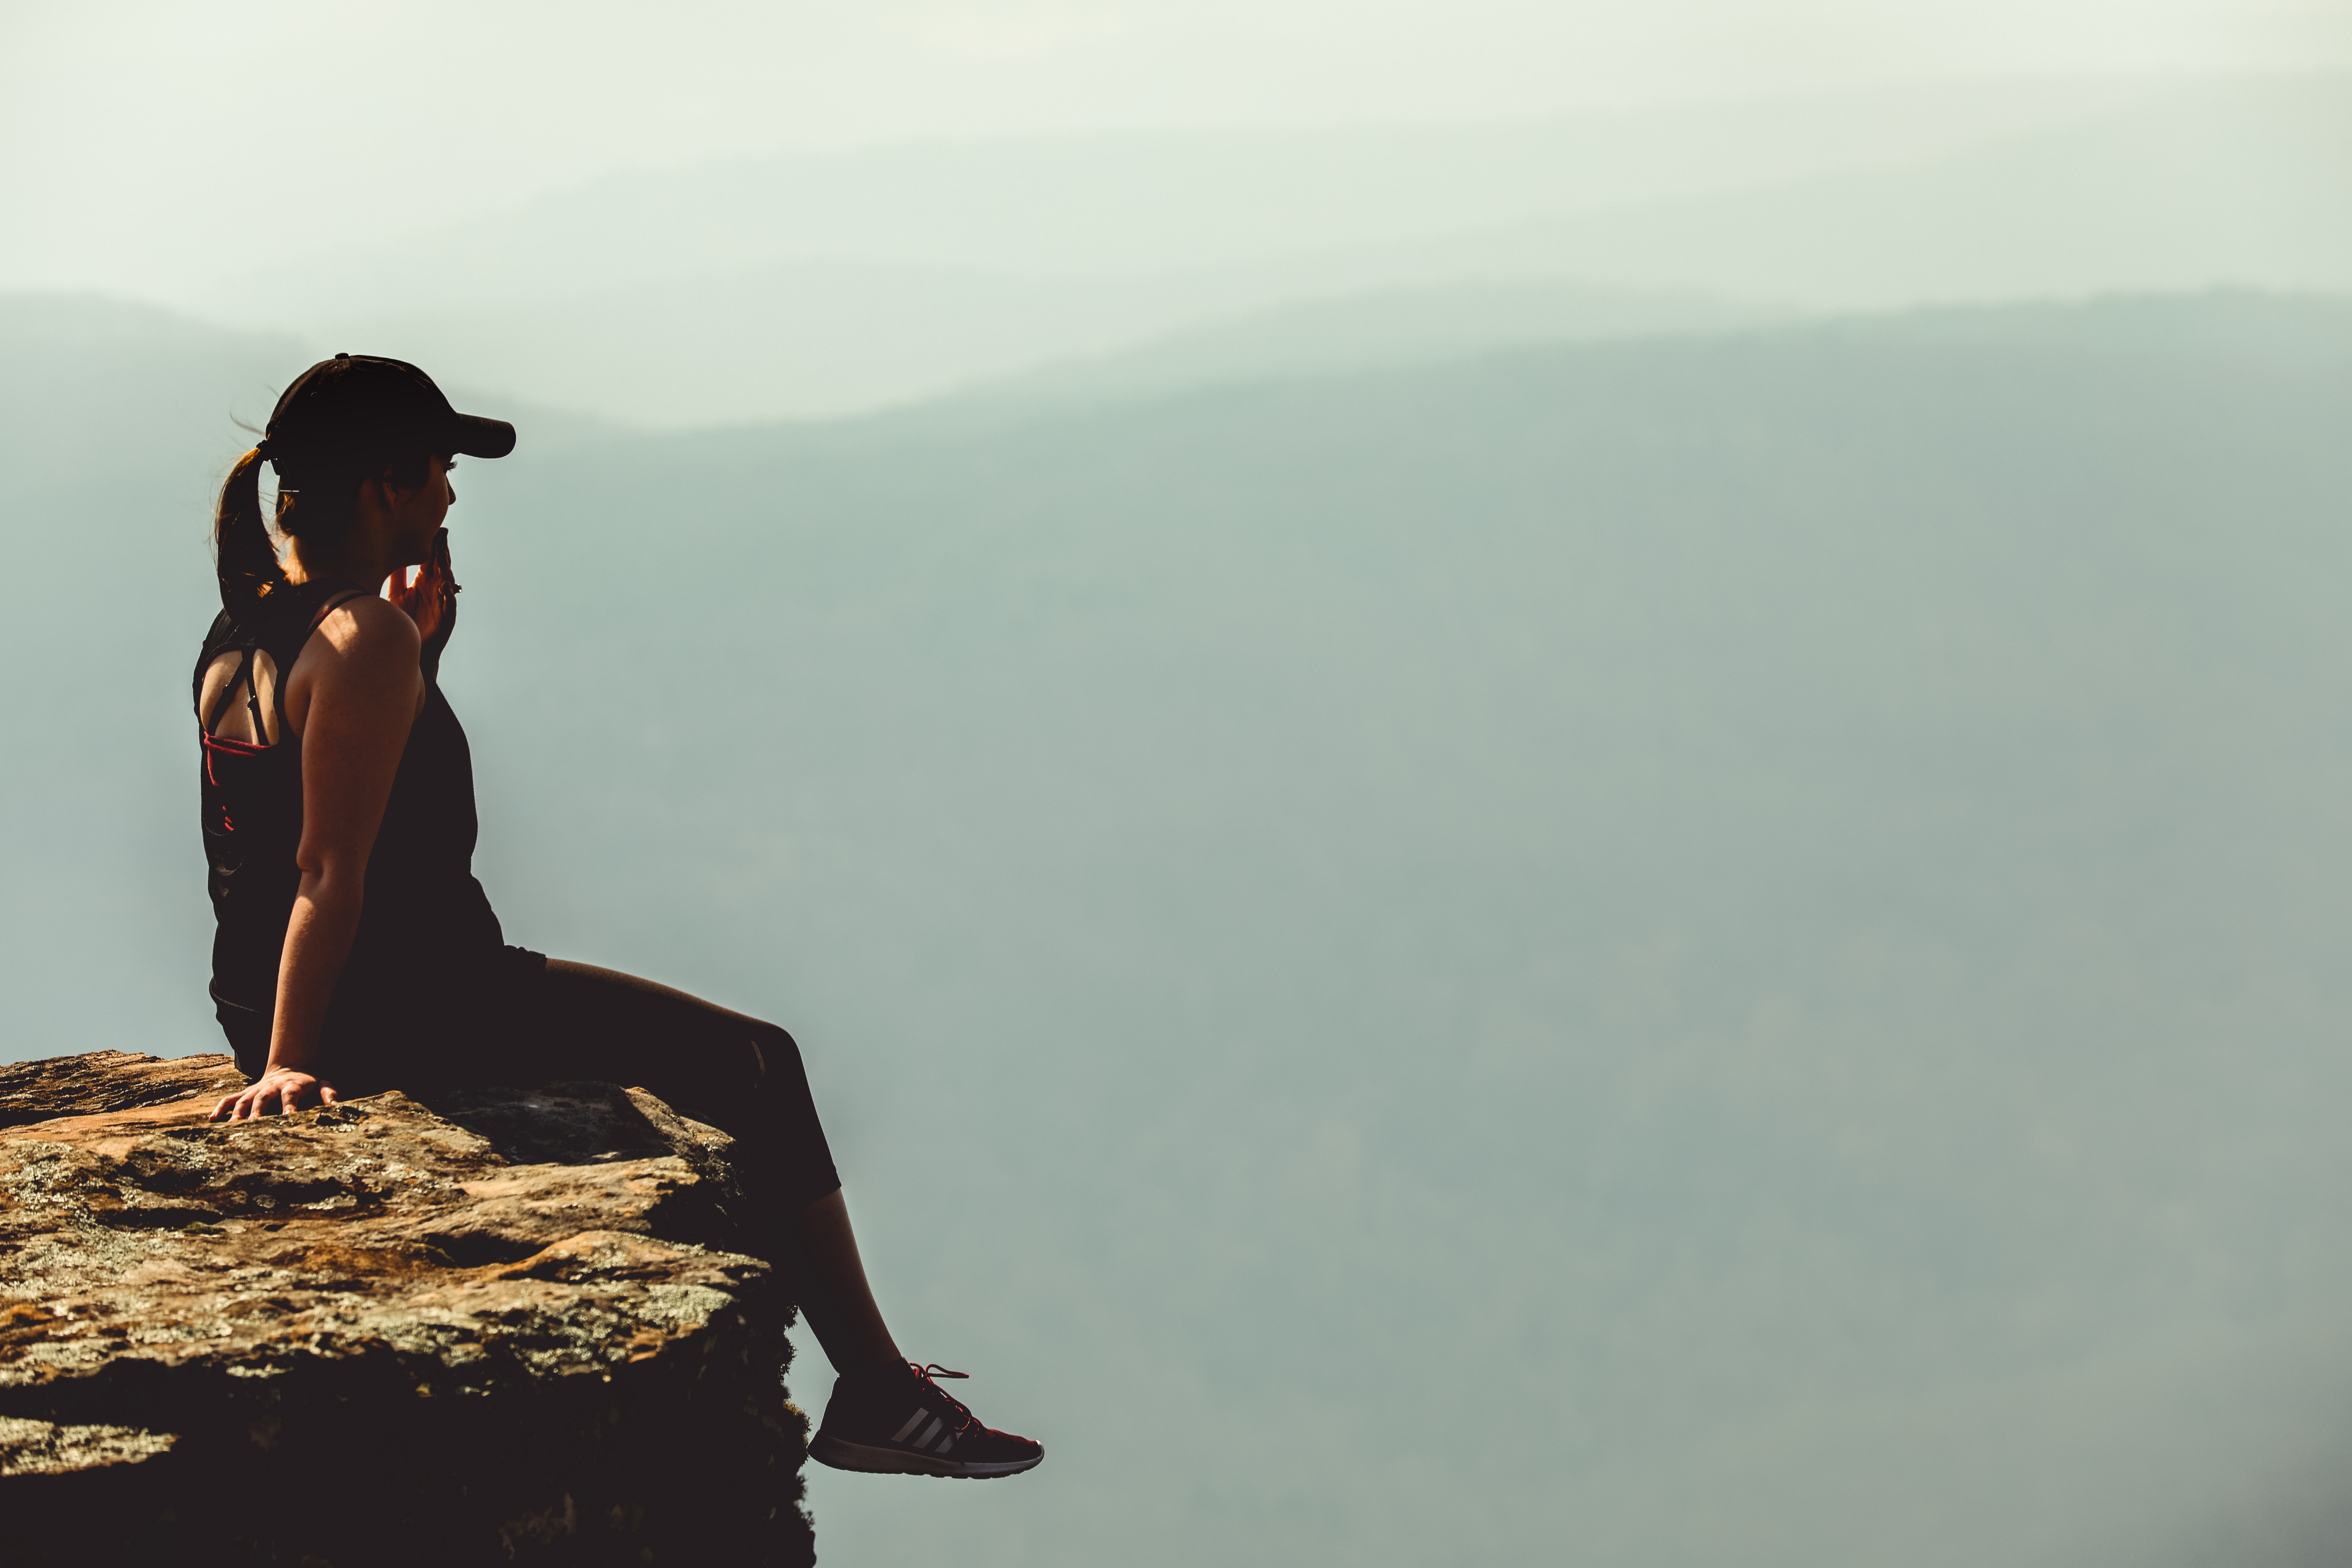 A woman sitting on the edge of a cliff. | Source: Pexels